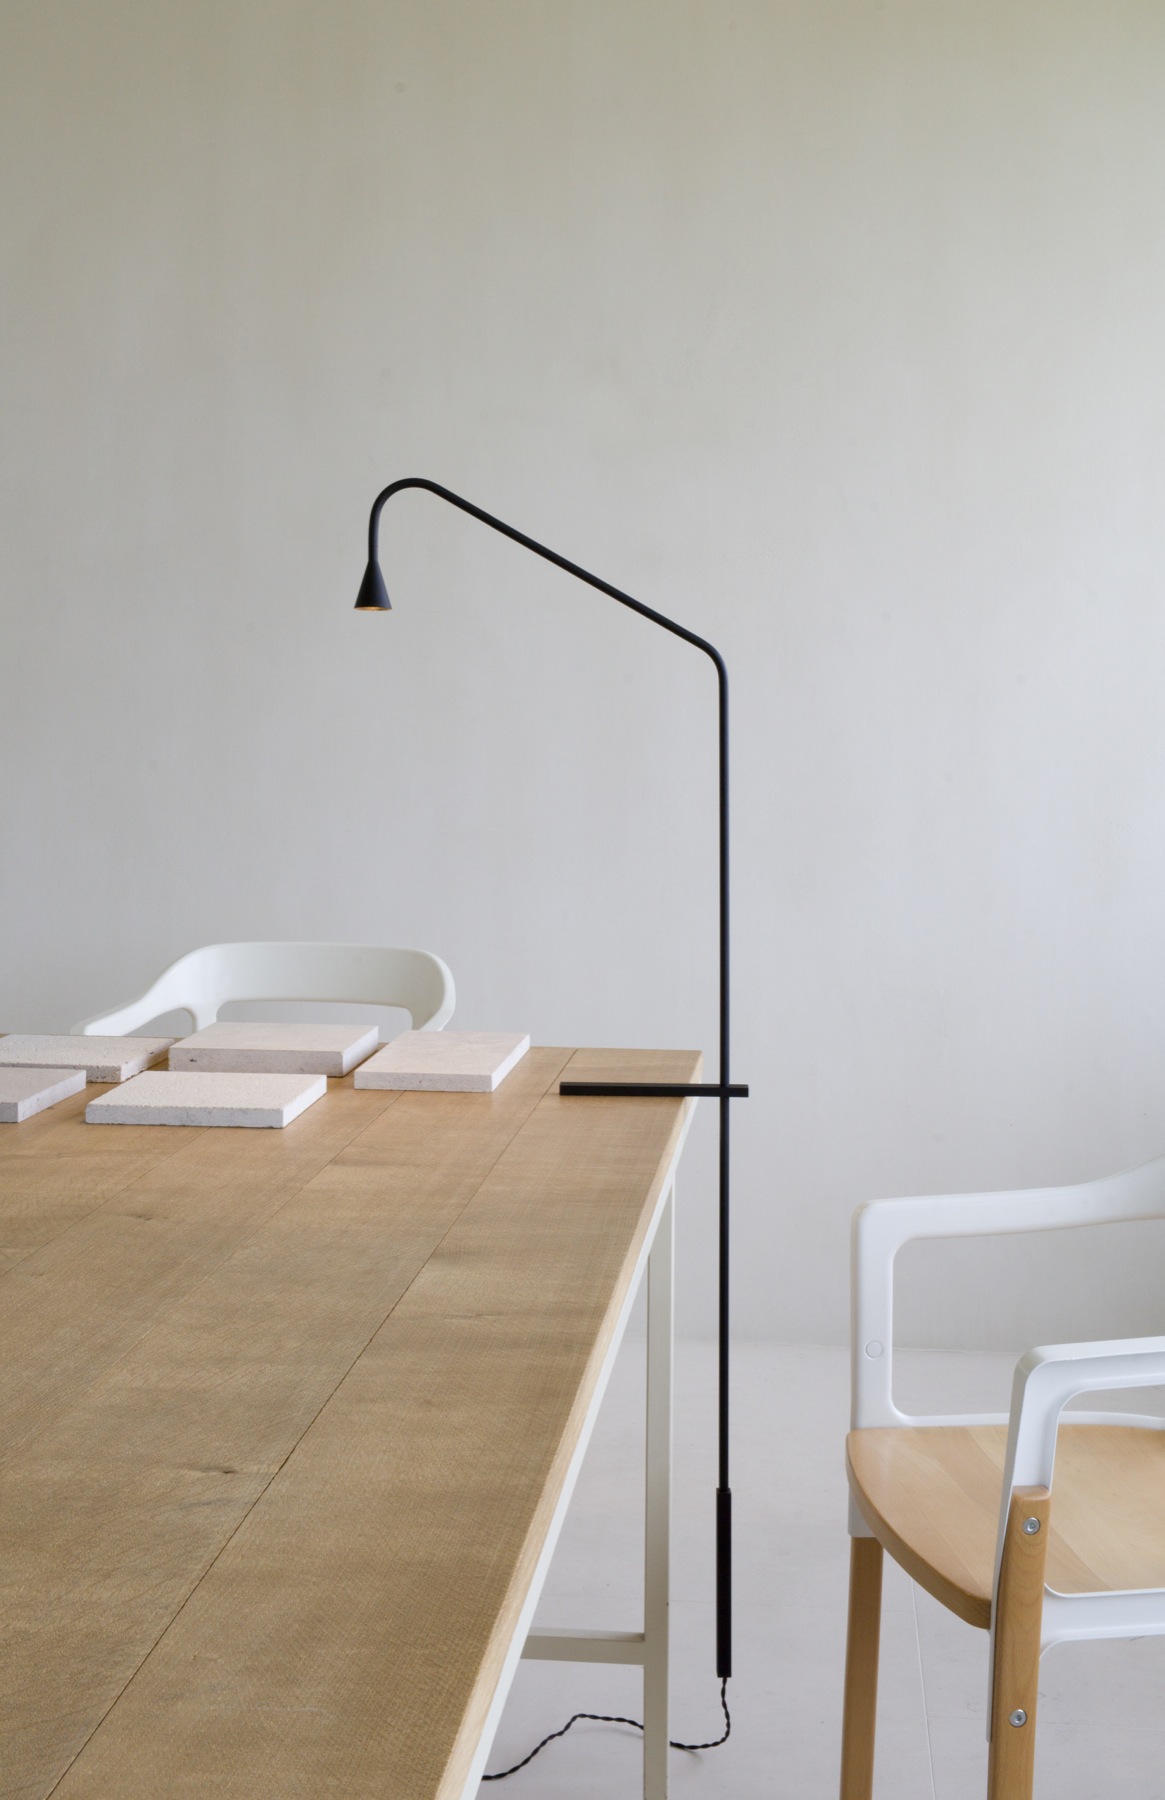 Austere lamp by Hans Verstuyft for Trizo21